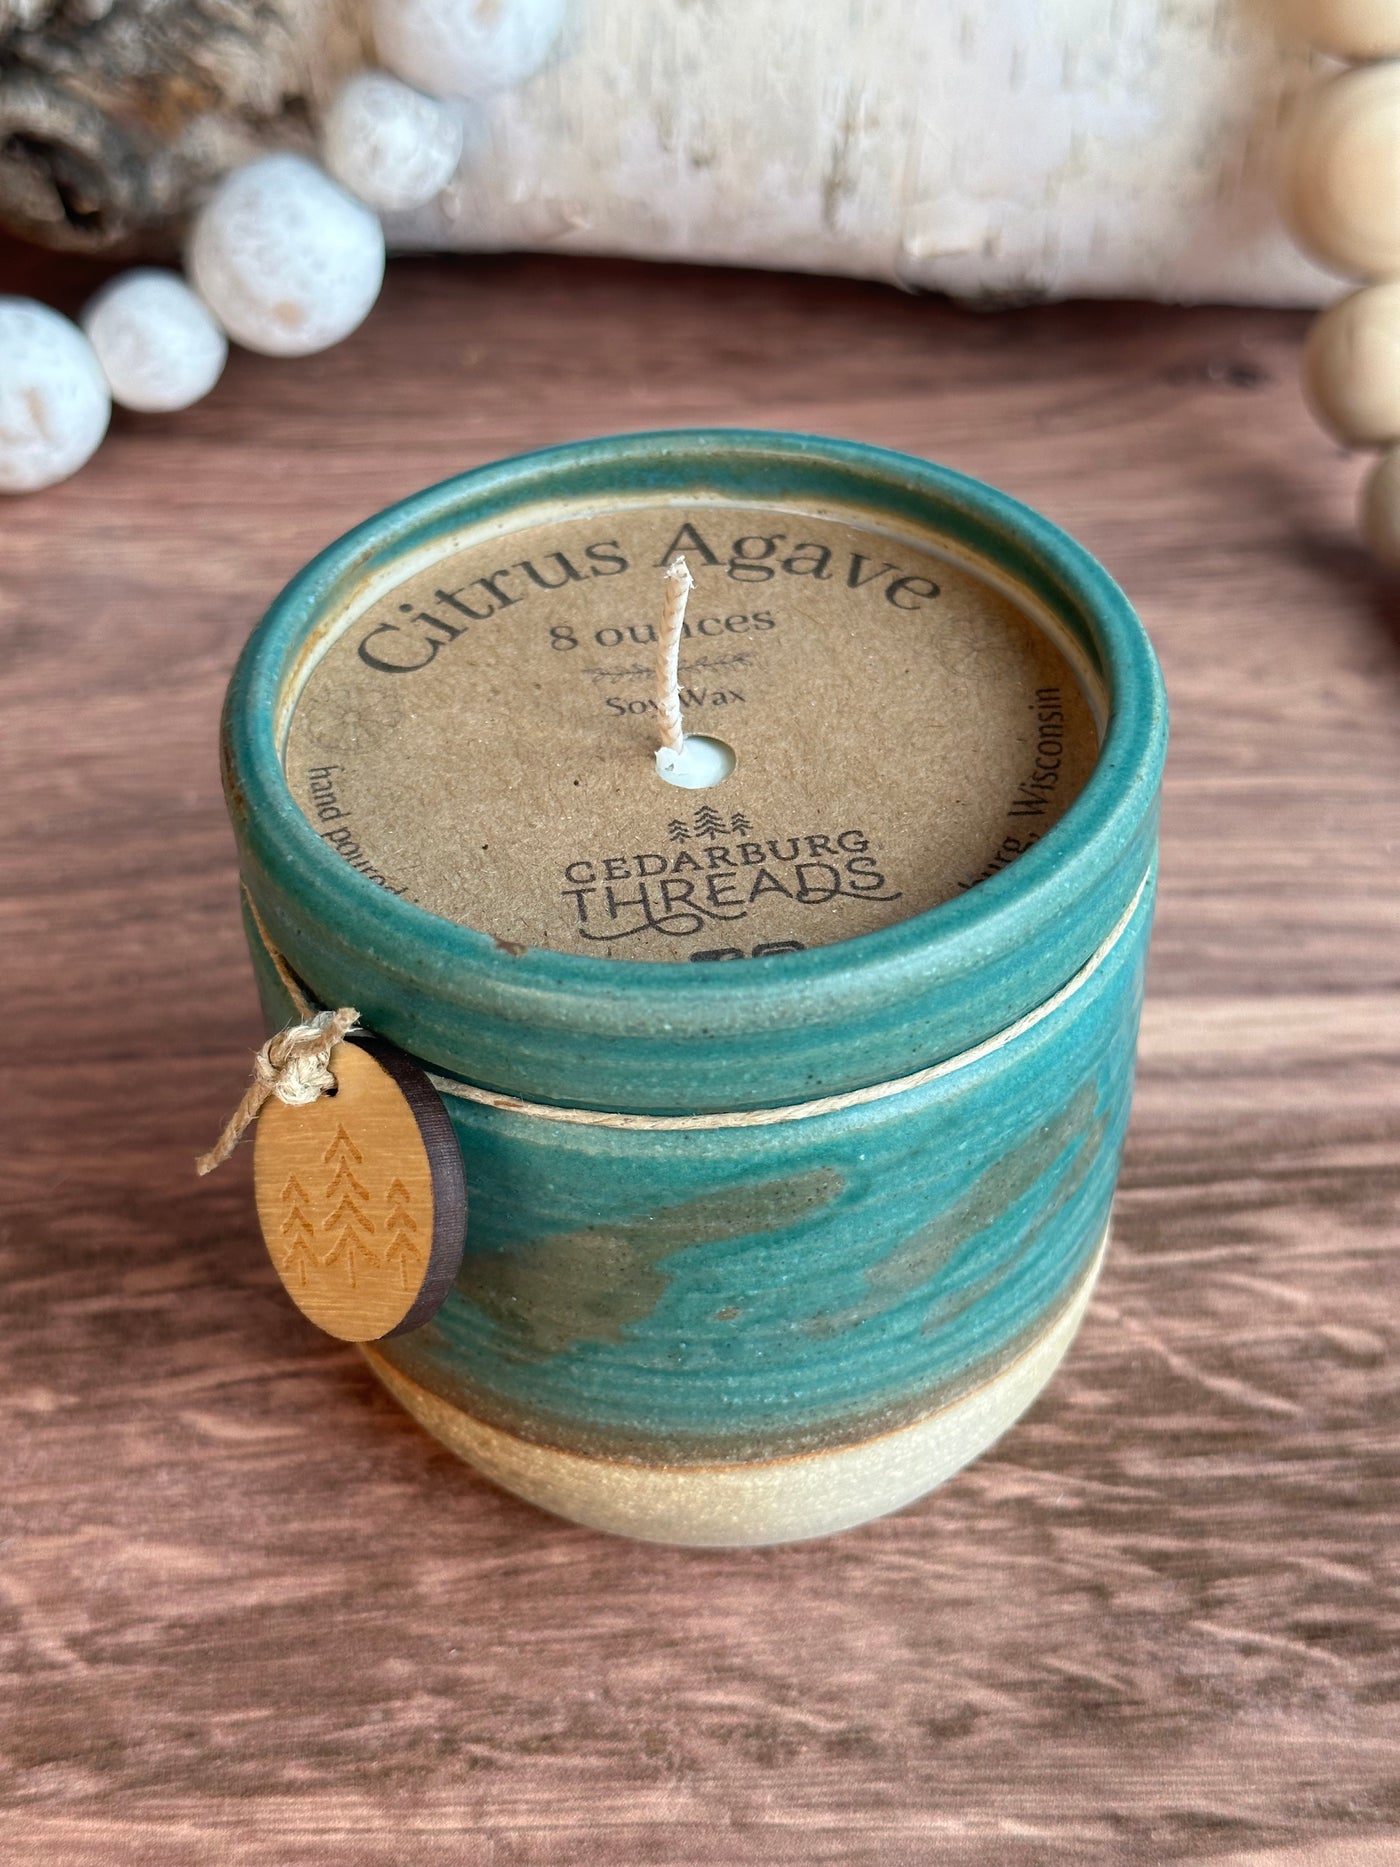 Citrus Agave hand poured soy candle in 8 ounce teal  ceramic candle vessel